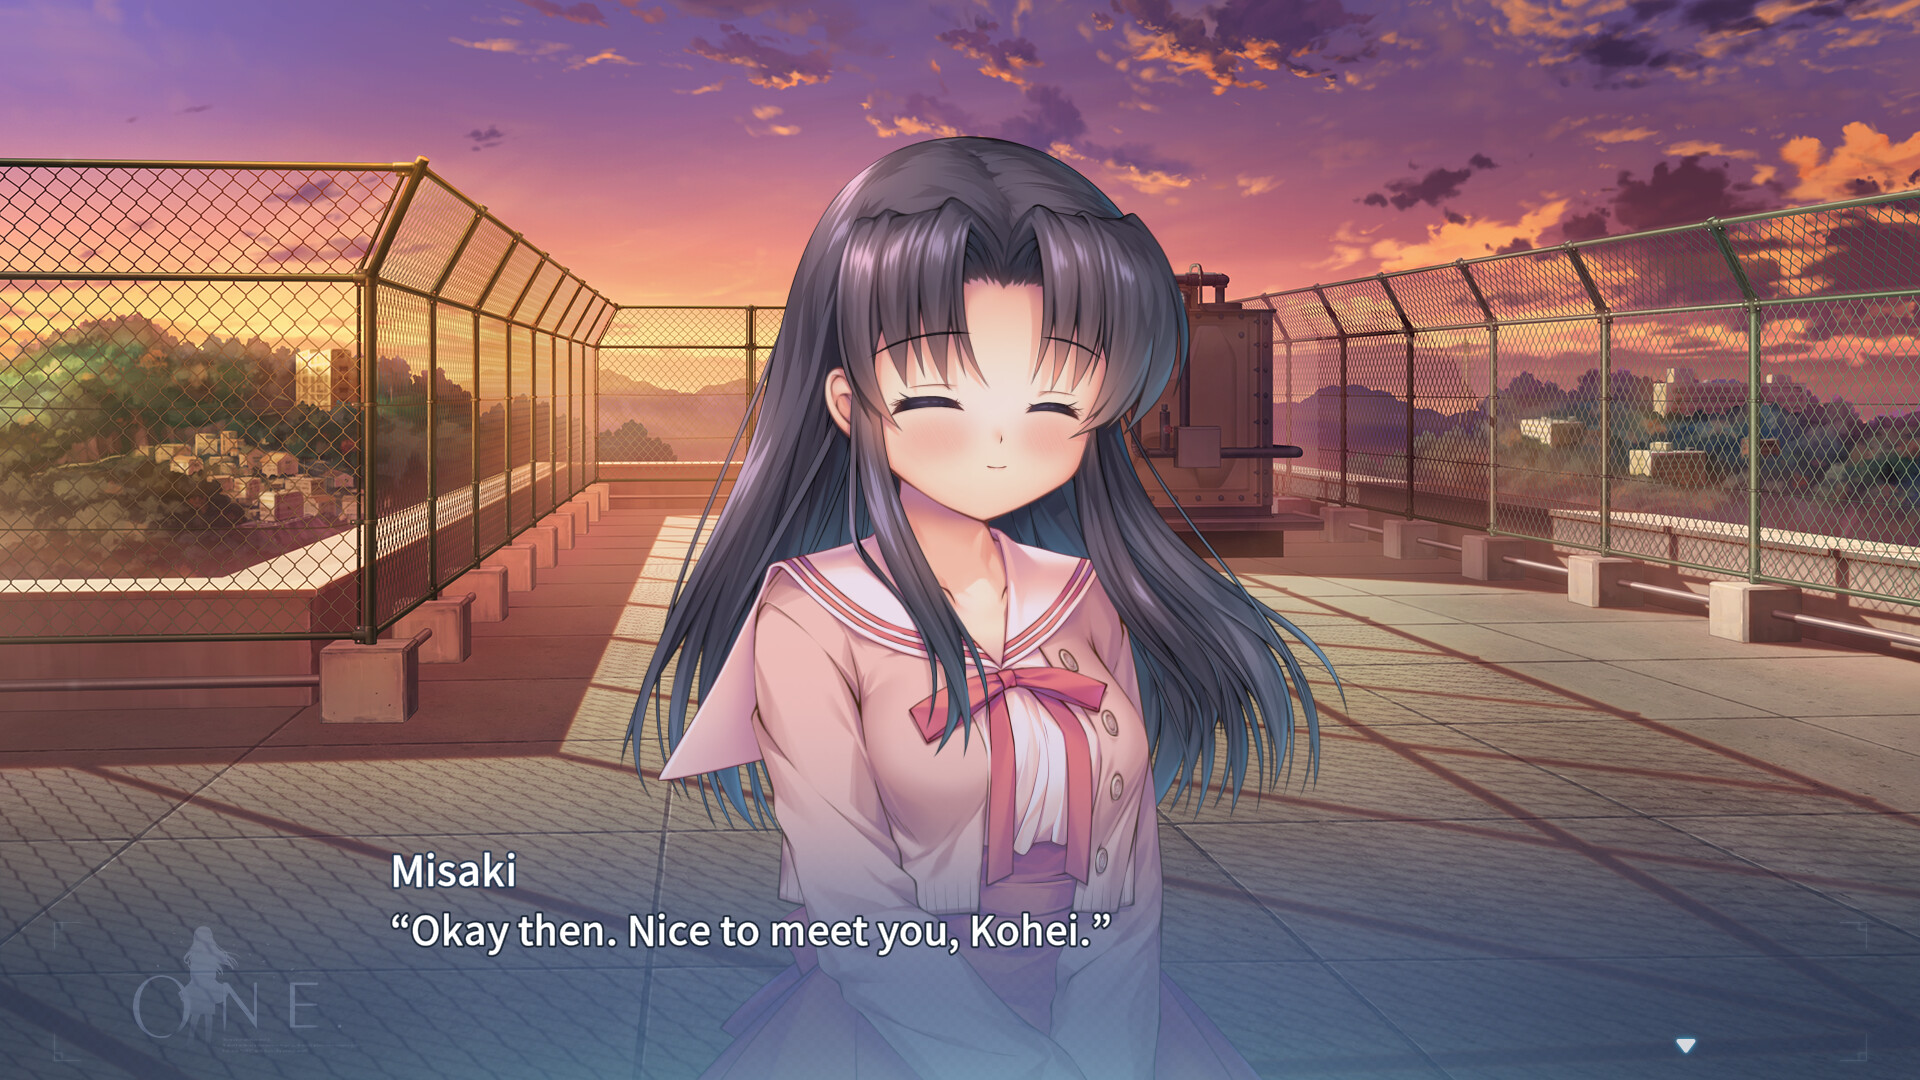 A screenshot from visual novel One on Nintendo Switch